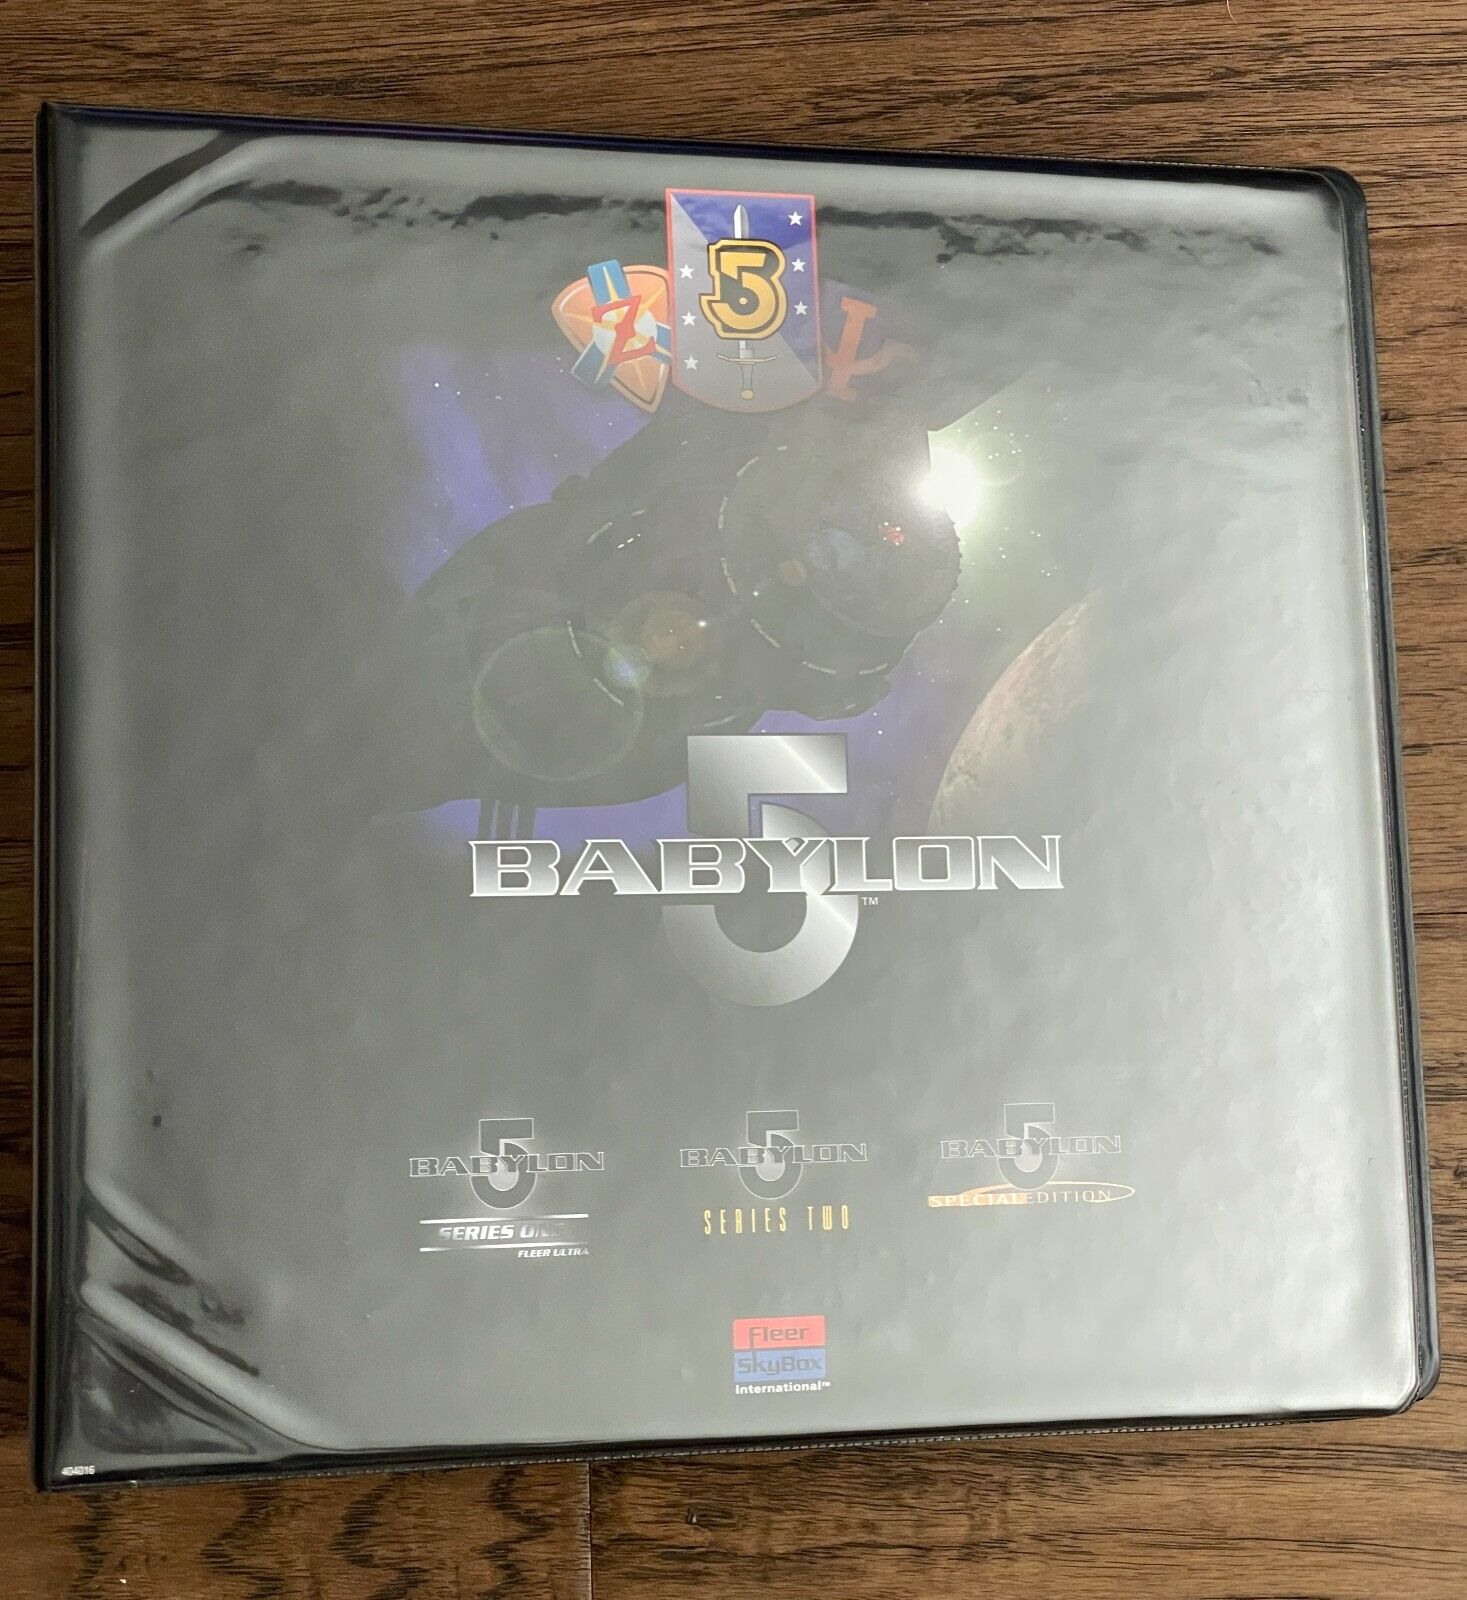 1998 SKYBOX BABYLON 5 SERIES ONE SERIES TWO SPECIAL SE ALBUM BINDER TRADING CARD